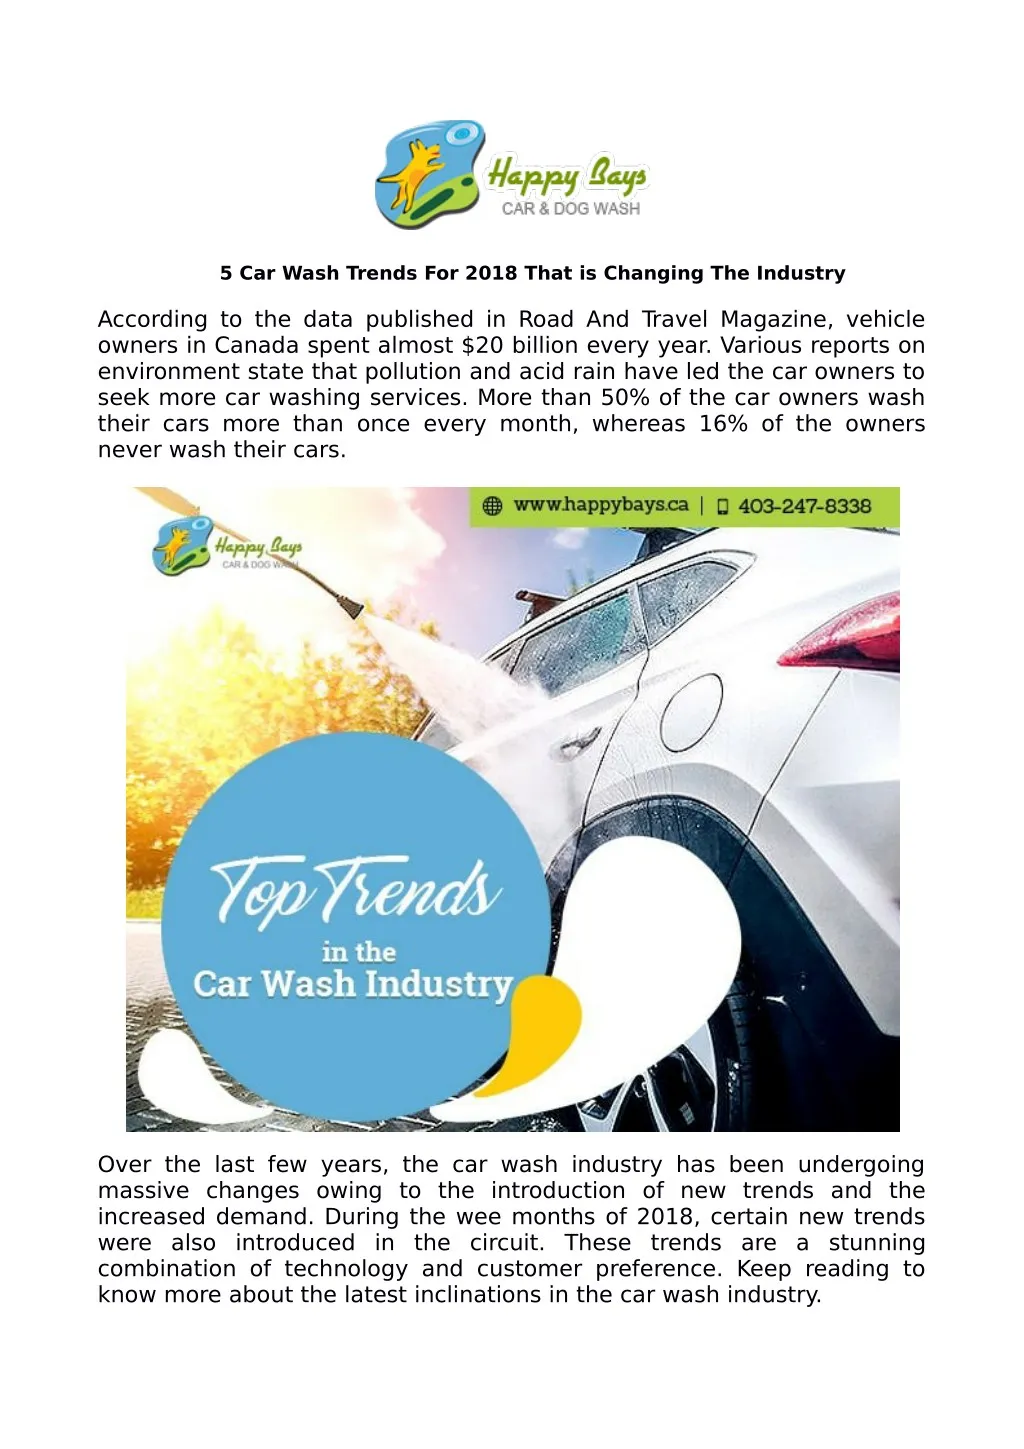 5 car wash trends for 2018 that is changing